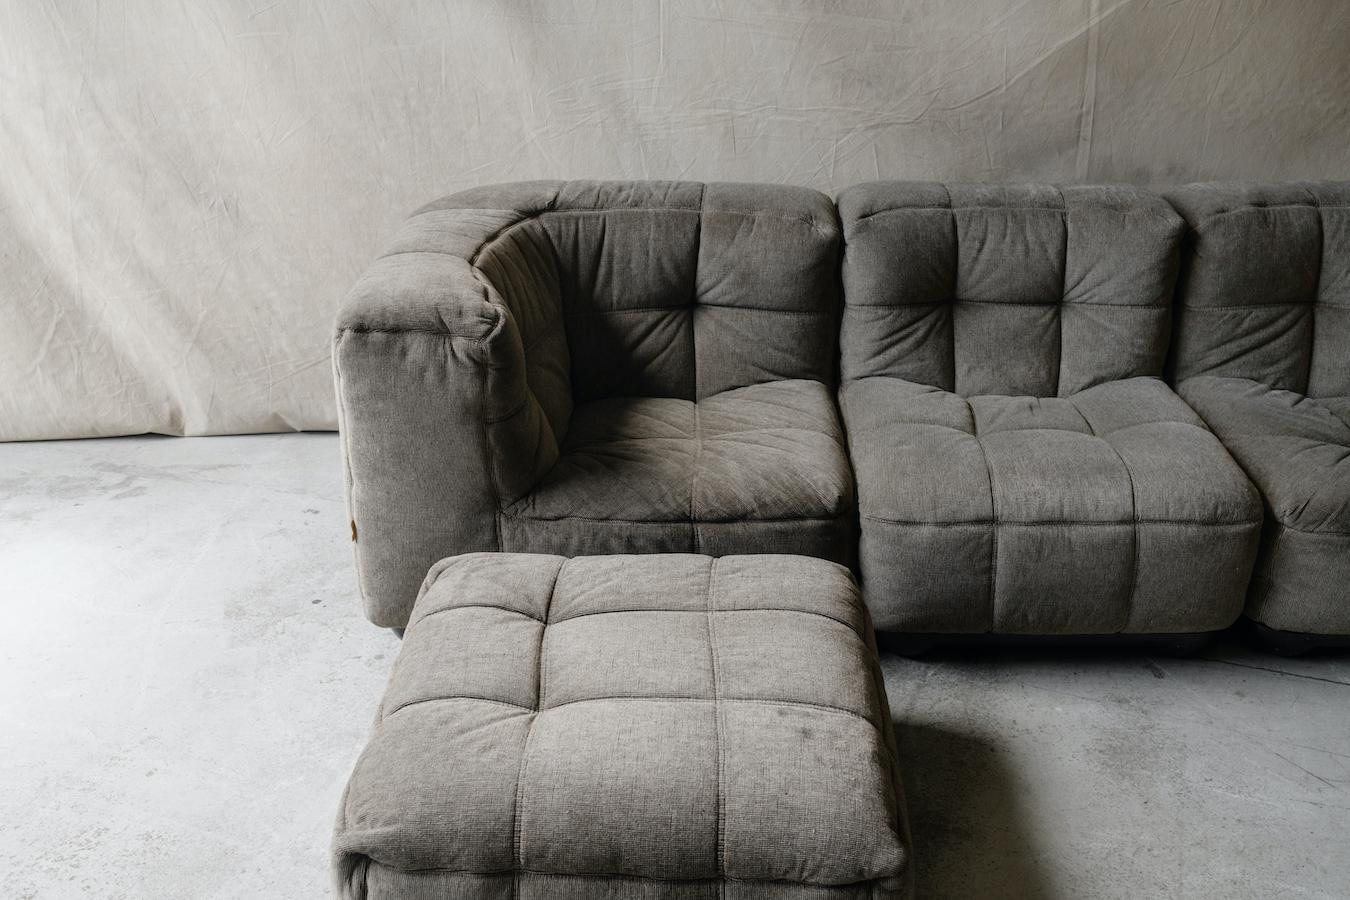 Vintage Kimba Sofa By Michel Ducaroy For Ligne Roset, France, Circa 1970.  Original grey linen upholstery in very good condition with light wear and use.  Manufactured by Ligne Roset, France.

We don't have the time or energy to write an extensive